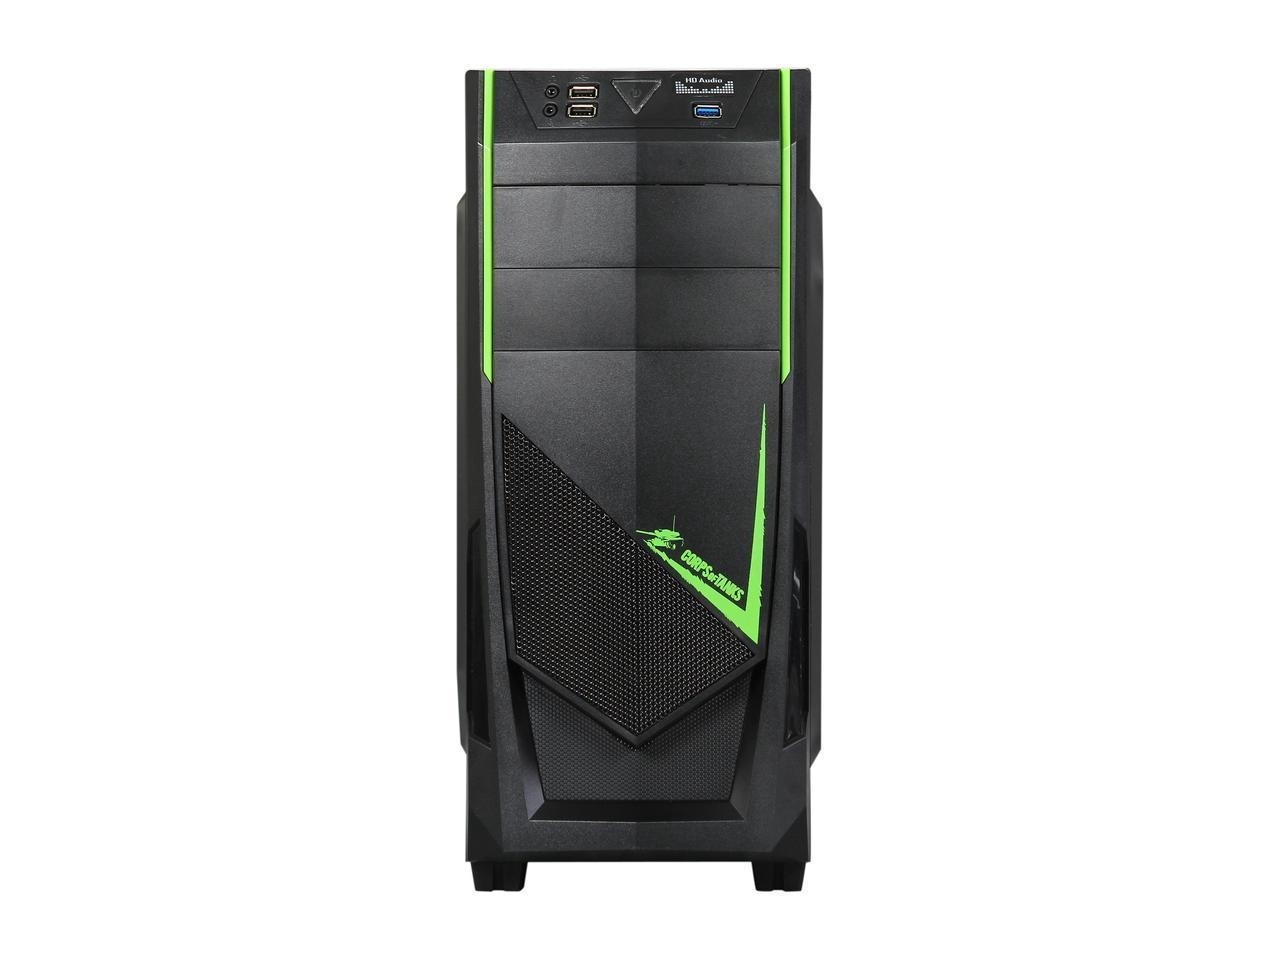 DIYPC Ranger-R8-G Black/Green USB 3.0 ATX Mid Tower Gaming Computer Case with 3 